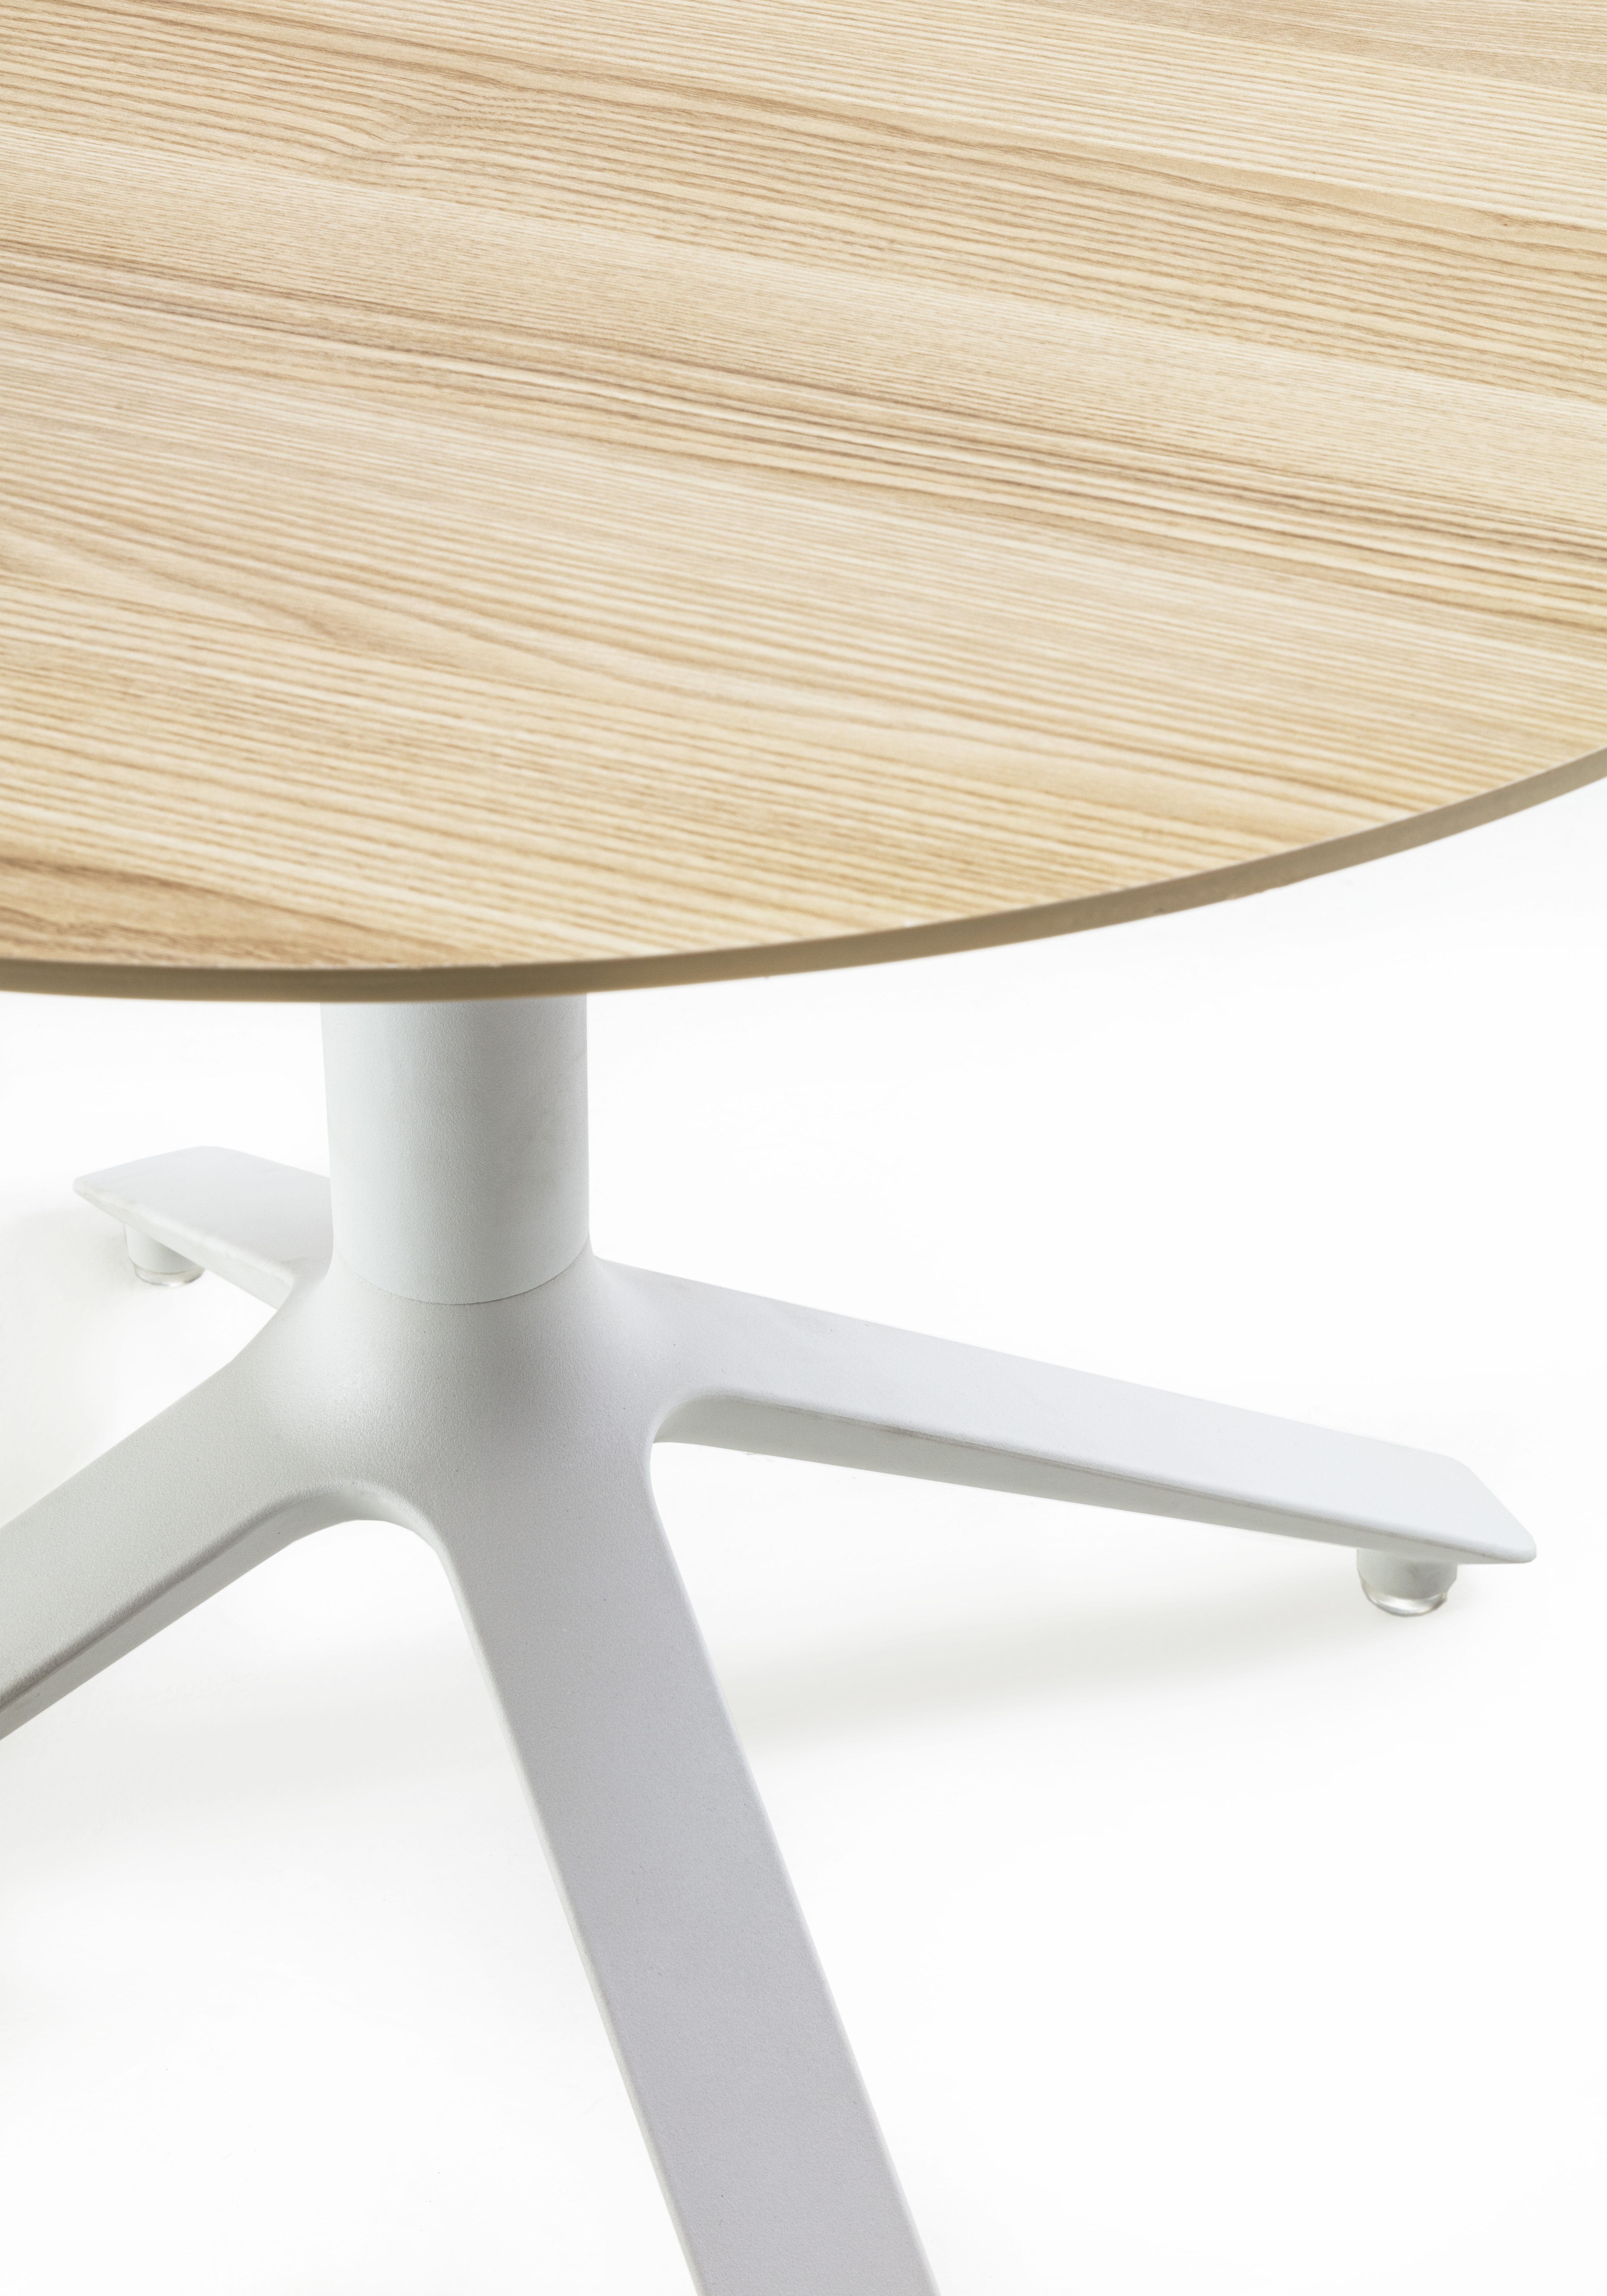 TB Eex Table Base white detail Clear top